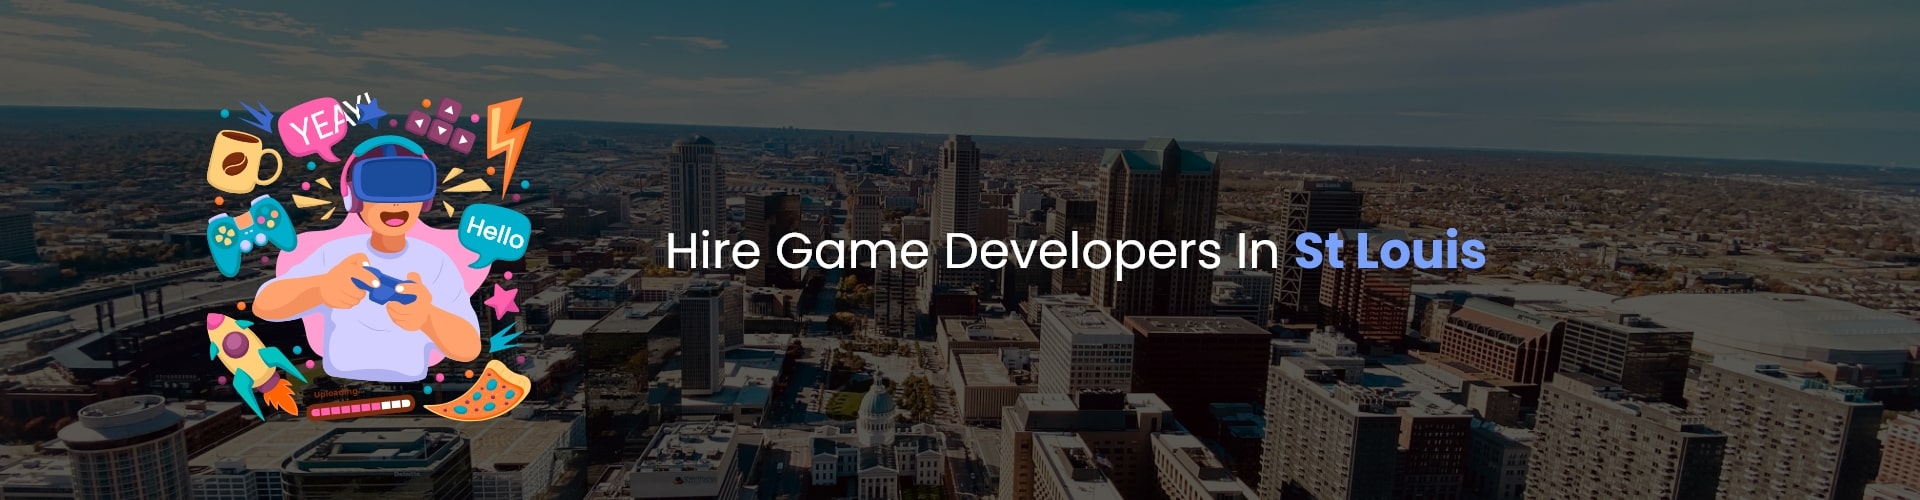 hire game developers in st louis